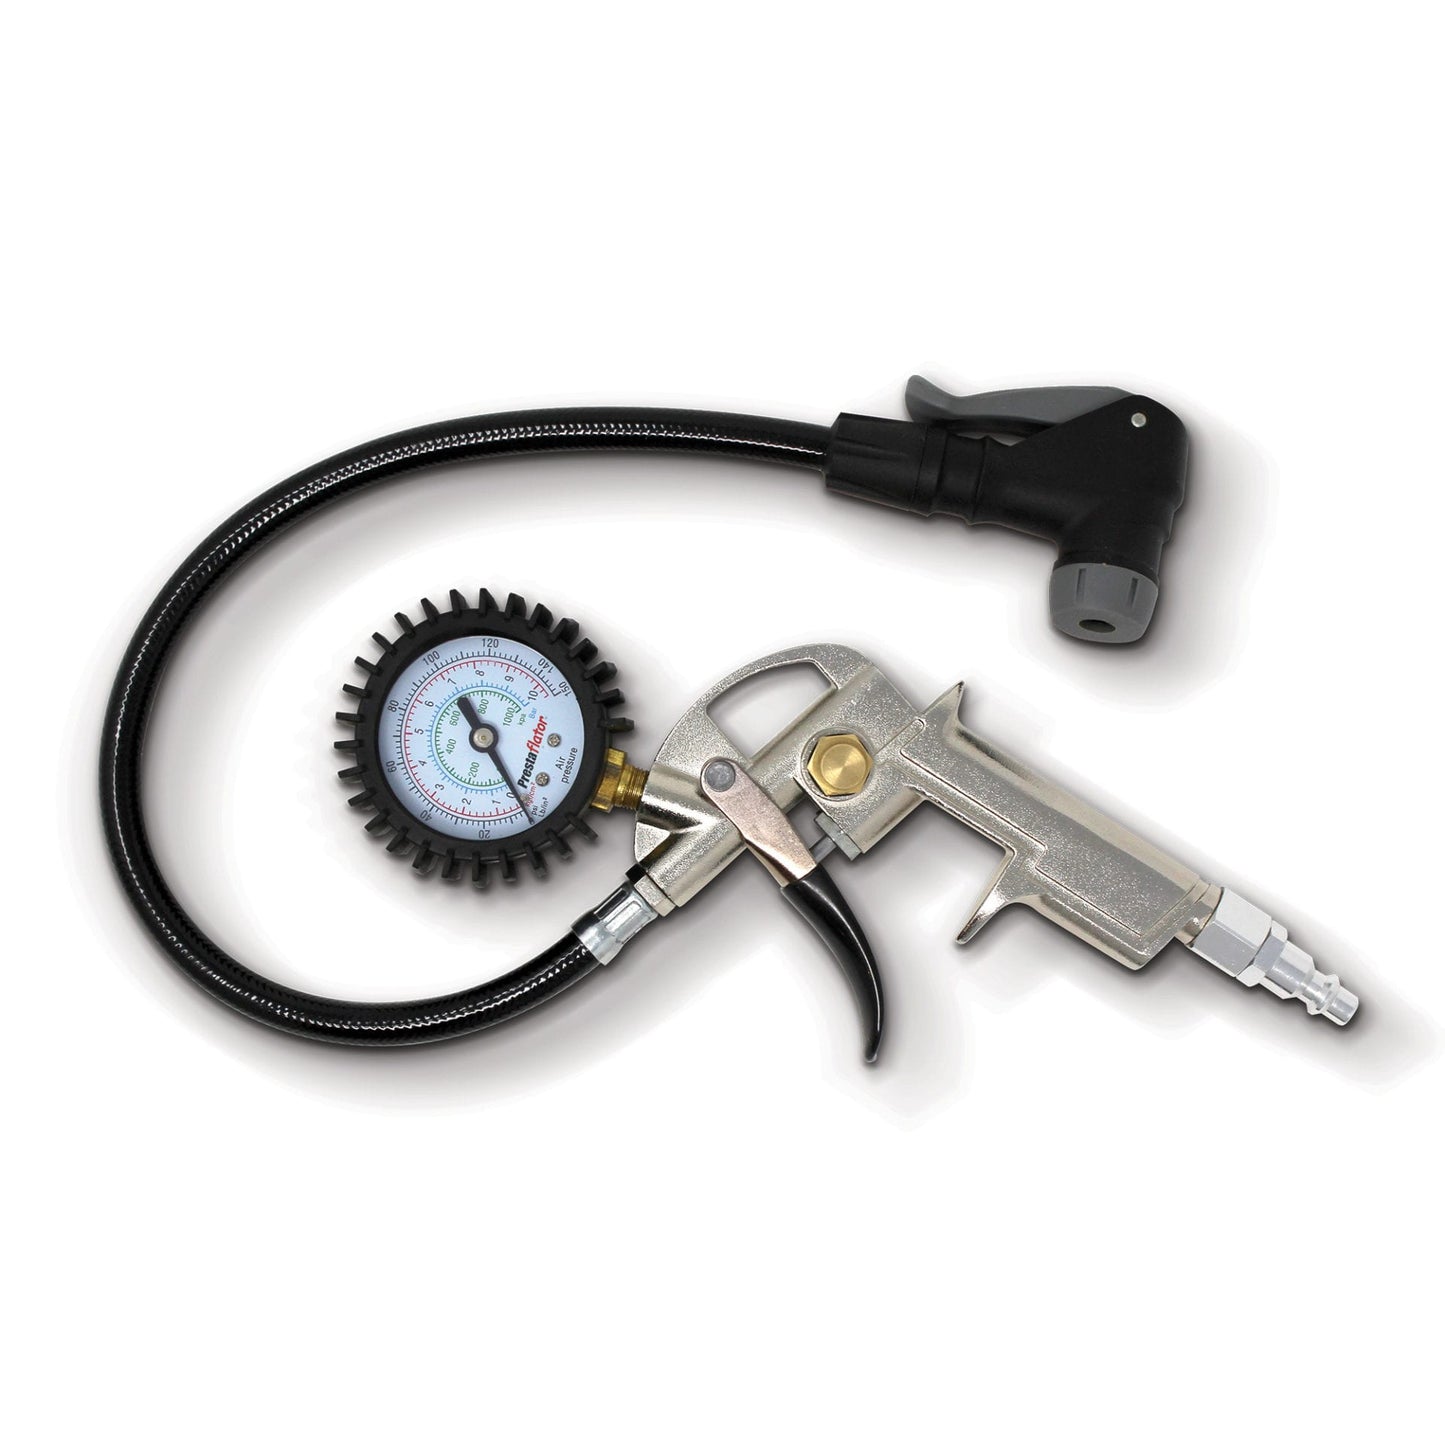 Prestaflator Eco tire inflator tool with digital dial and black parts